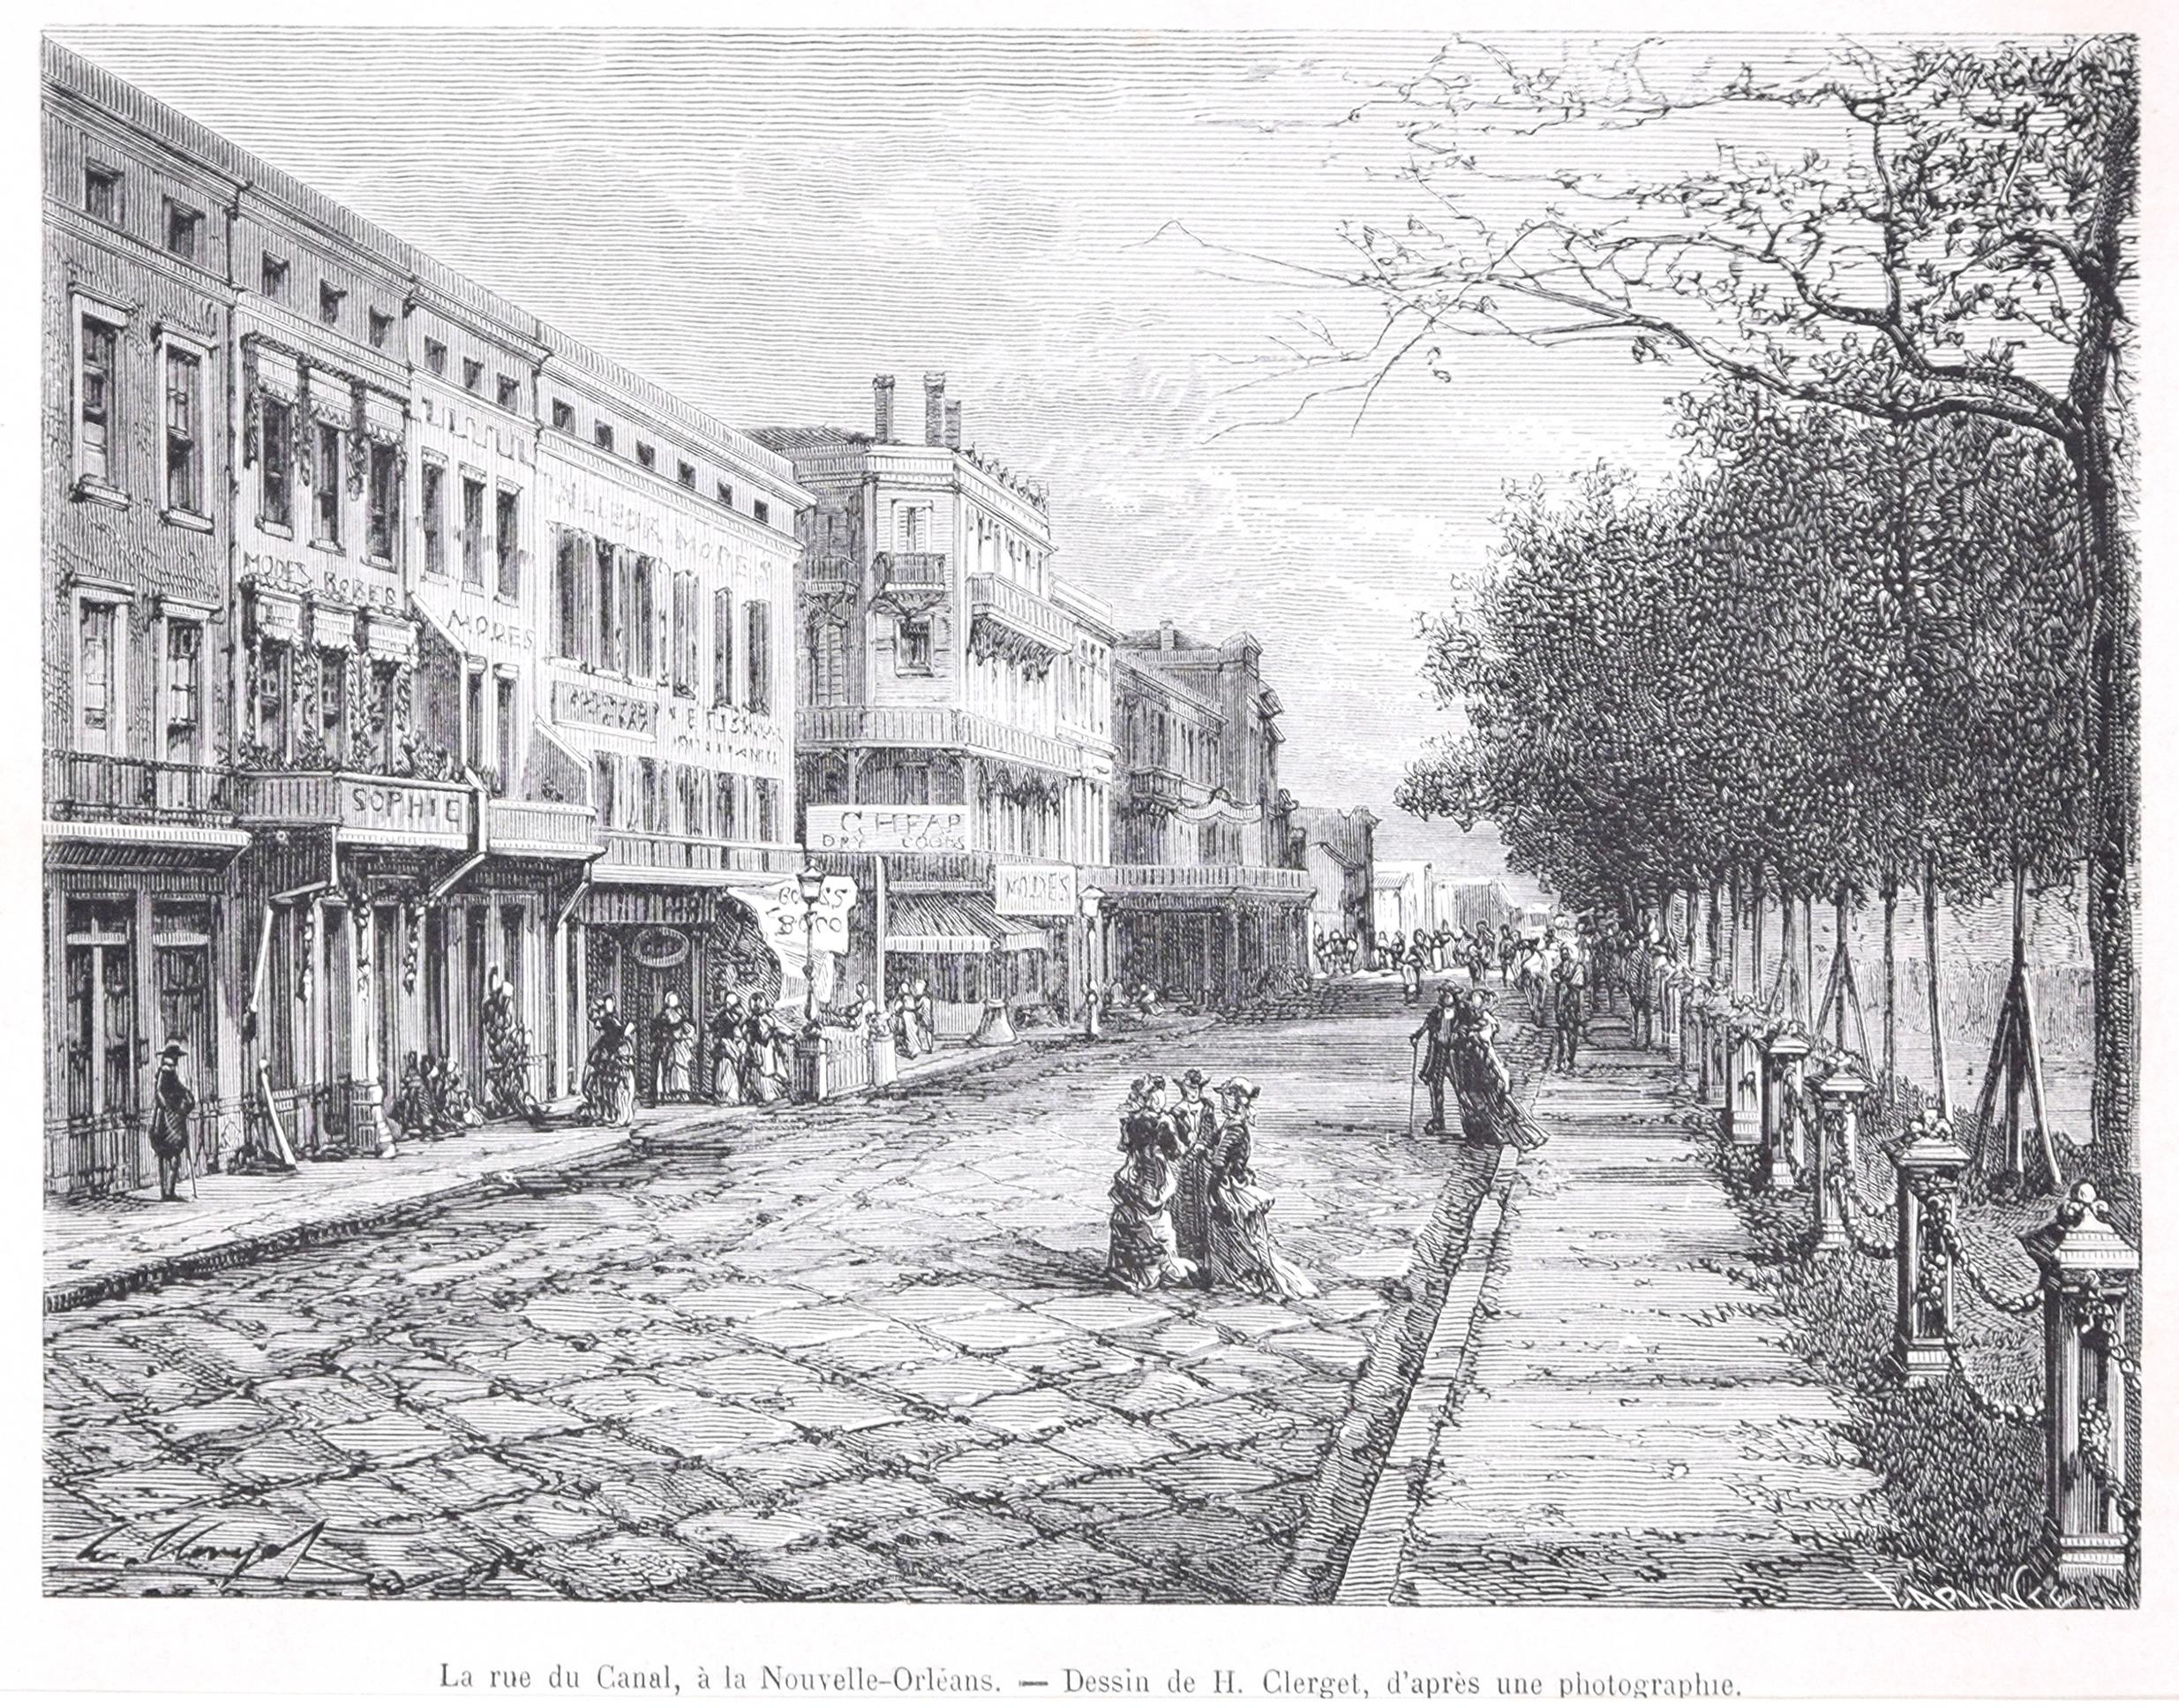 Charles Laplante Figurative Print - La Rue du Canal - View of New Orleans - Woodcut Print After Hubert Clerge - 1880